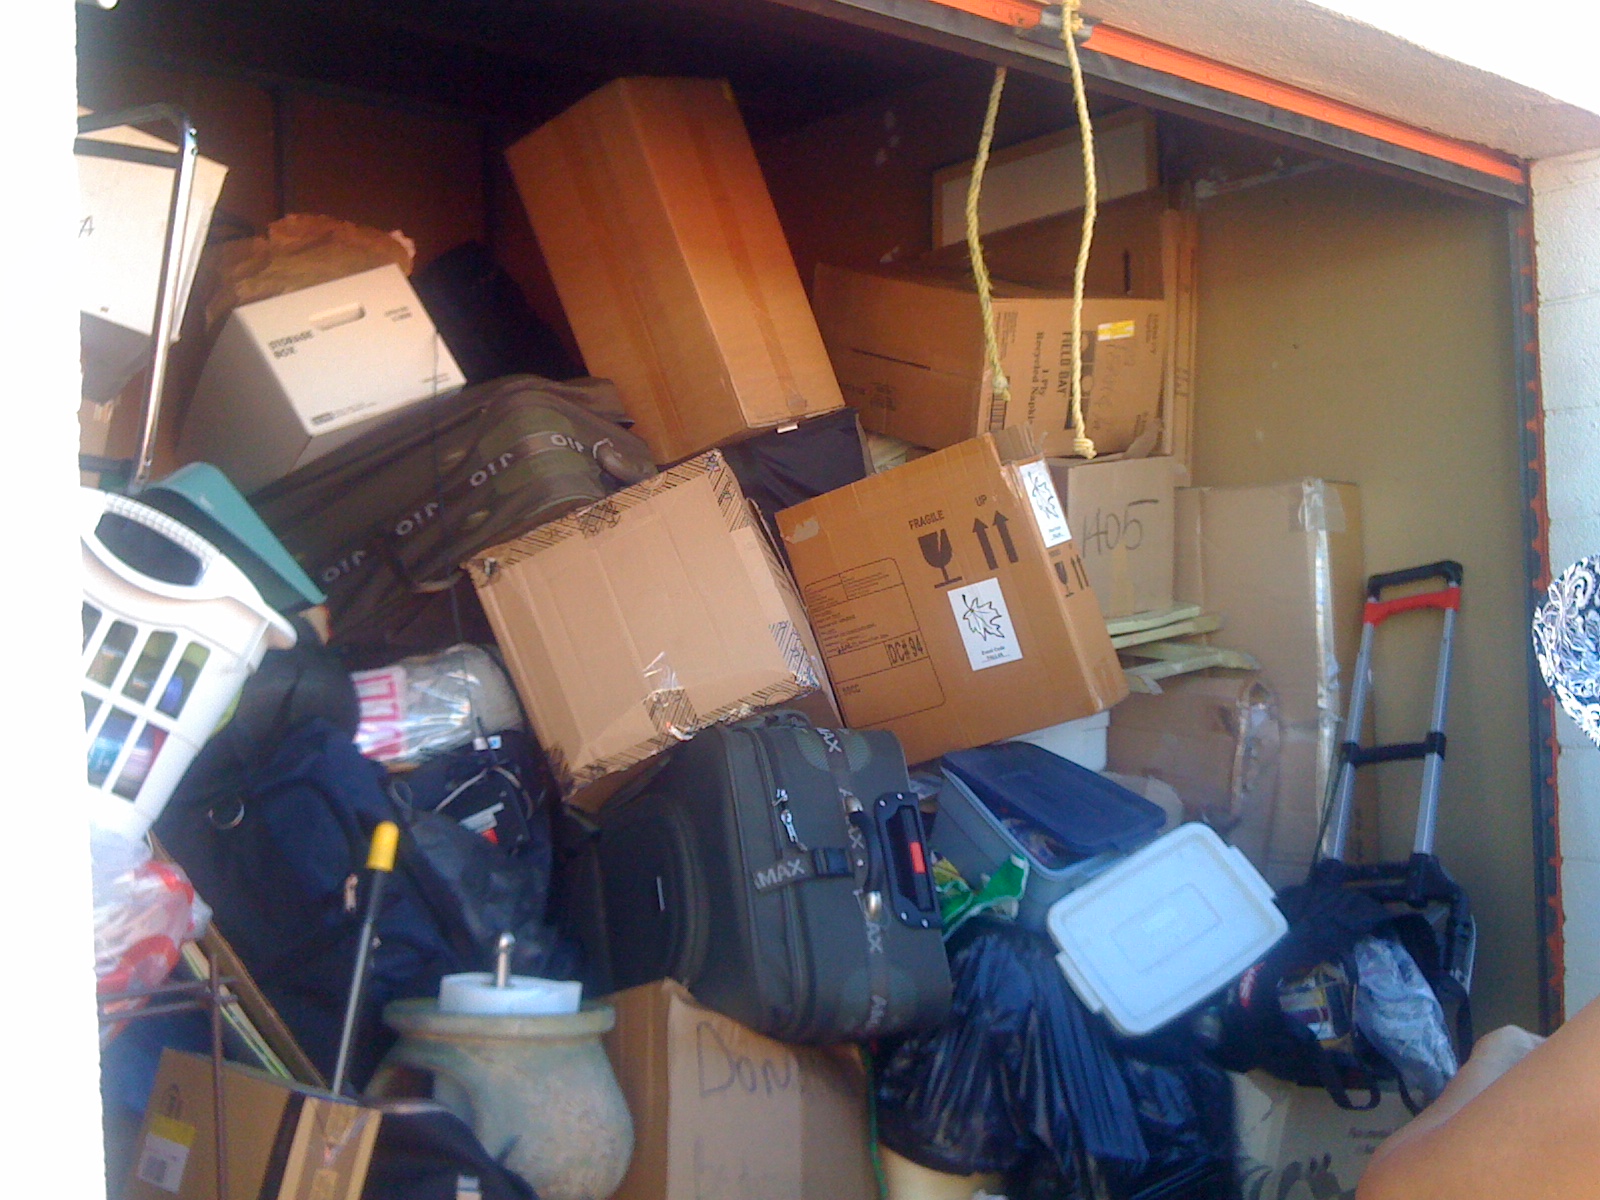 Storage unit after being ransacked